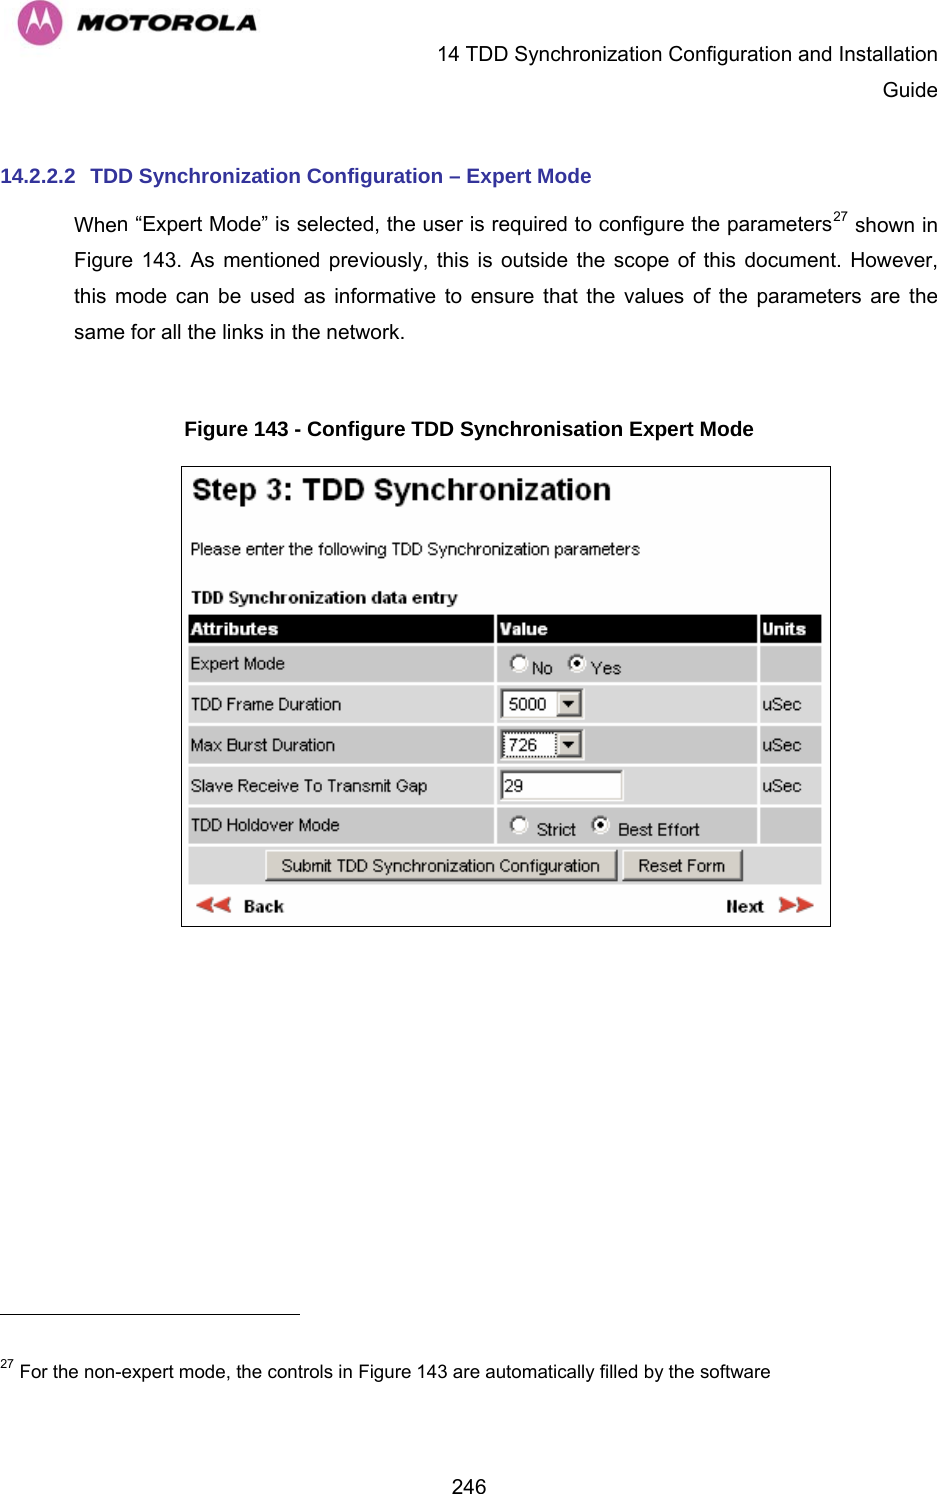   14 TDD Synchronization Configuration and Installation Guide  24614.2.2.2  TDD Synchronization Configuration – Expert Mode When “Expert Mode” is selected, the user is required to configure the parameters27 shown in Figure 143. As mentioned previously, this is outside the scope of this document. However, this mode can be used as informative to ensure that the values of the parameters are the same for all the links in the network.  Figure 143 - Configure TDD Synchronisation Expert Mode                                                         27 For the non-expert mode, the controls in Figure 143 are automatically filled by the software 